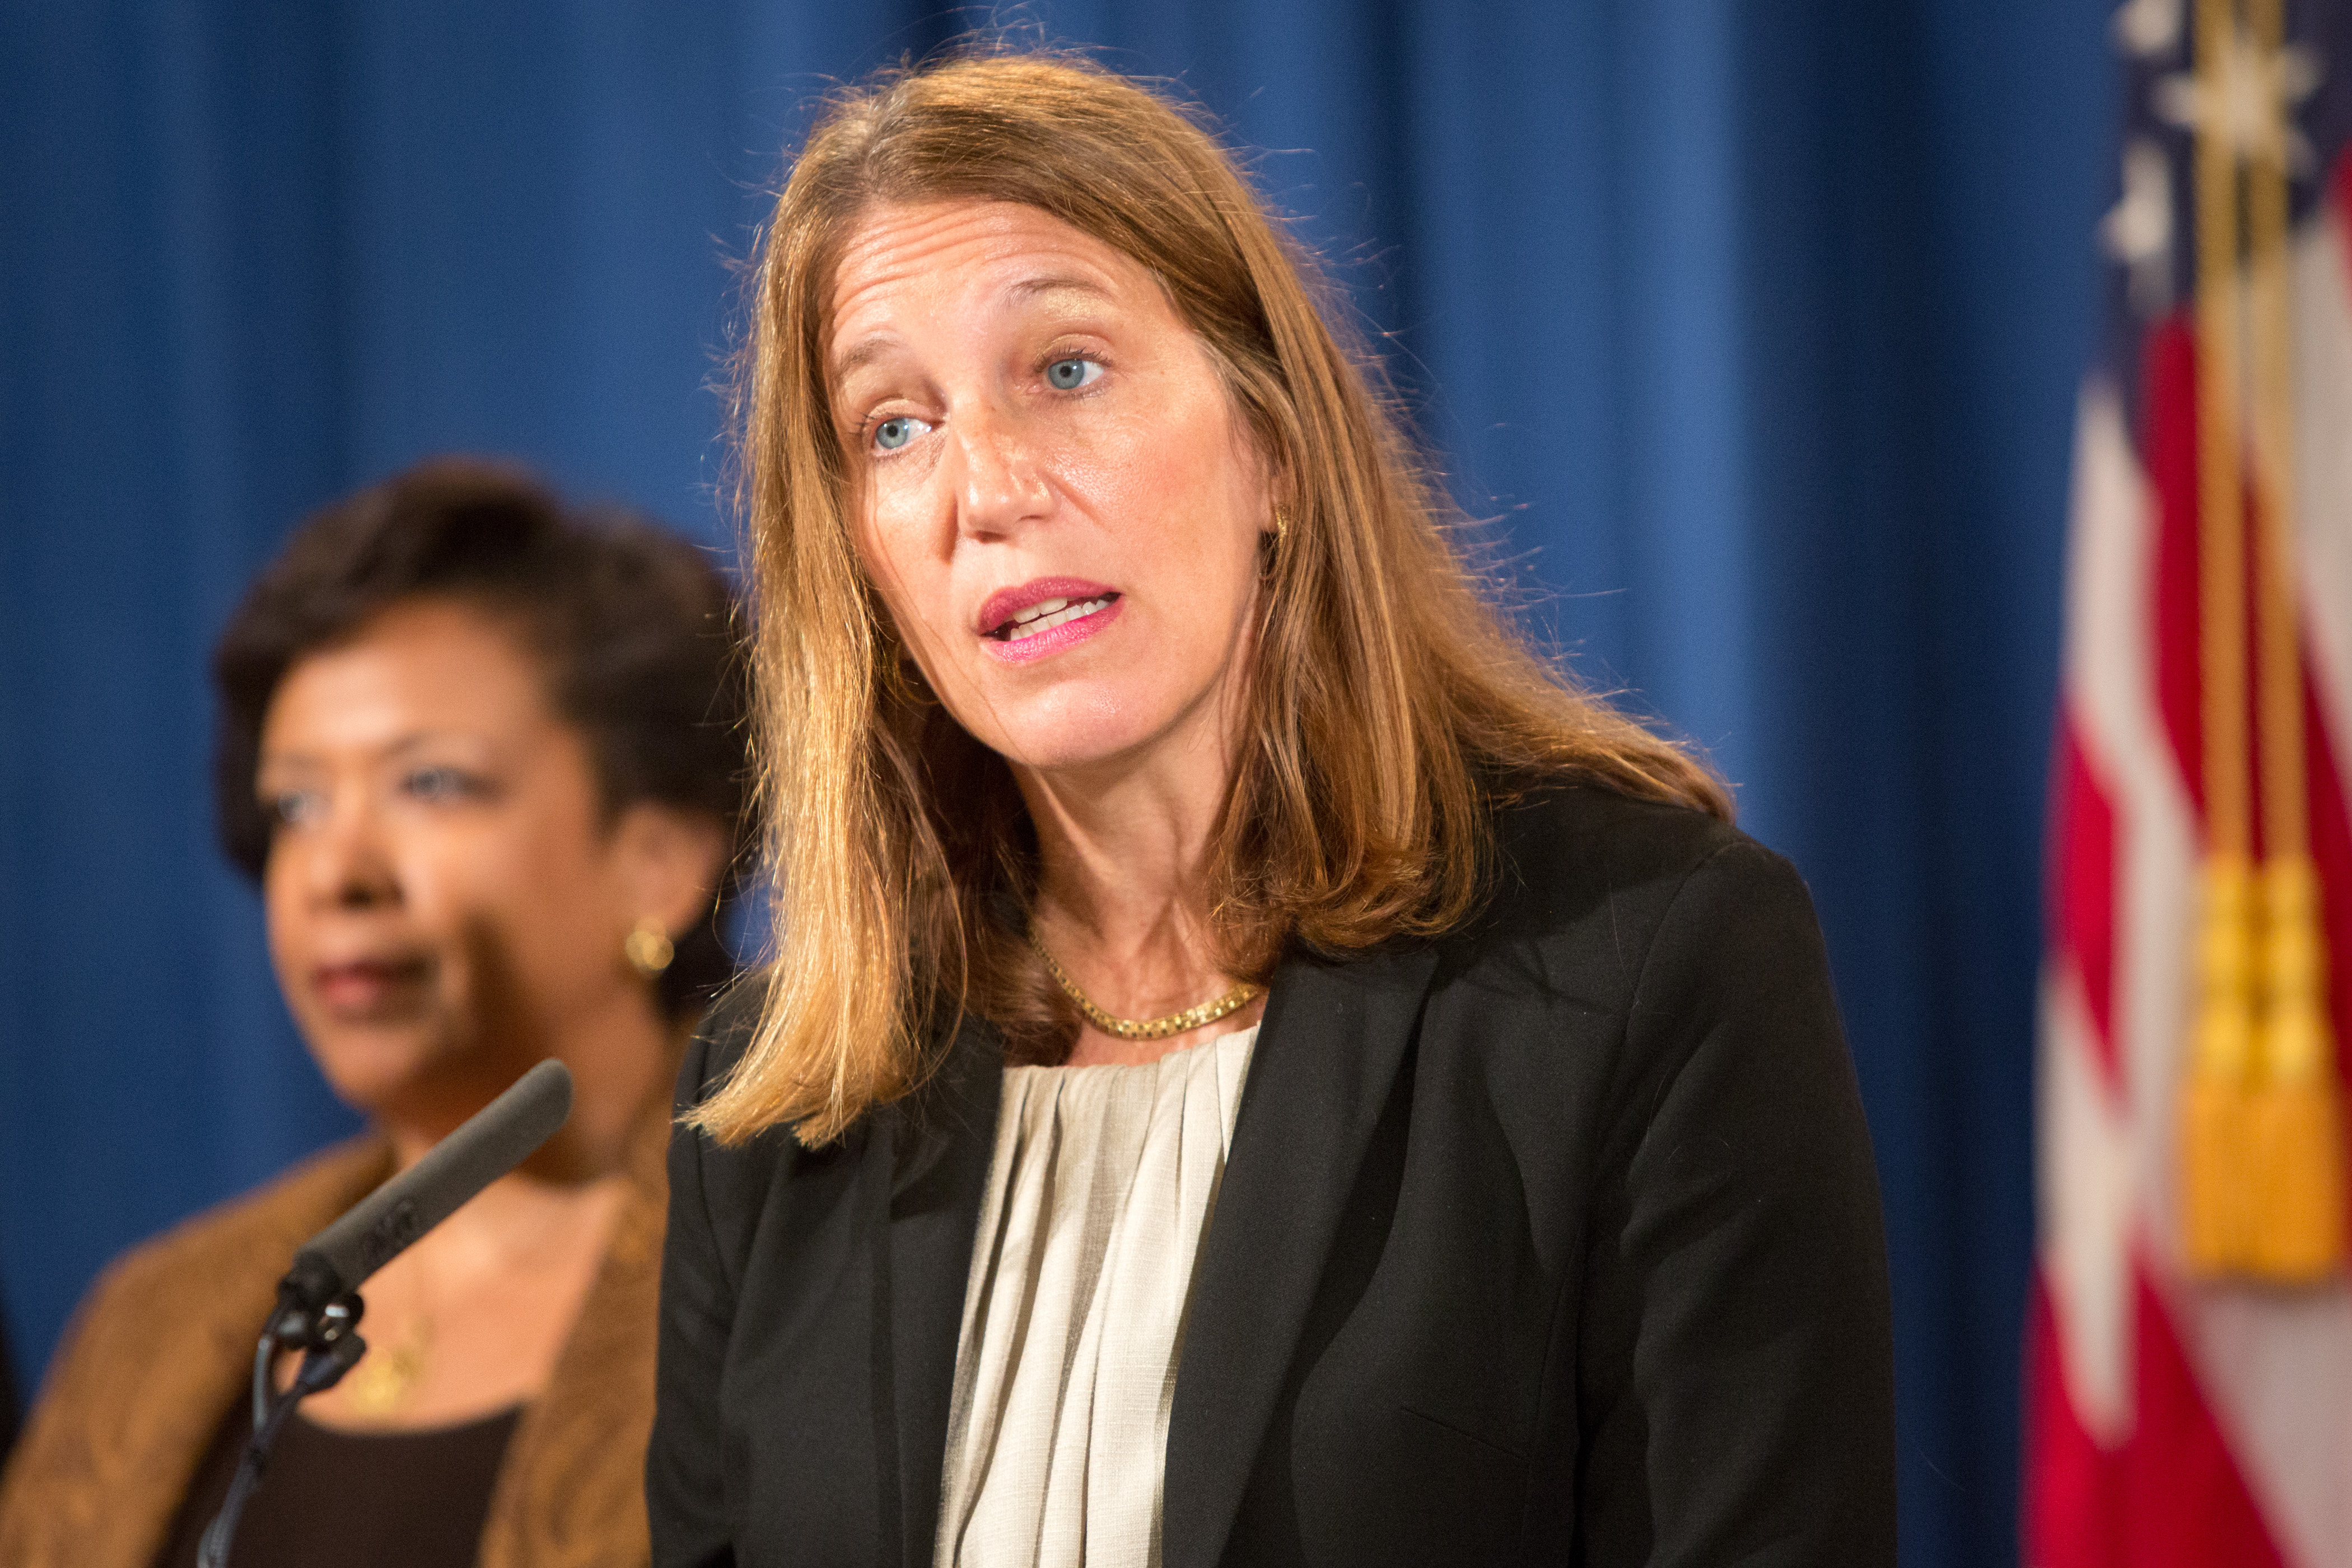 Department of Health and Human Services Secretary Sylvia Mathews Burwell speaks at a press conference on June 22, 2016 in Washington, DC. (Allison Shelley&mdash;Getty Images)